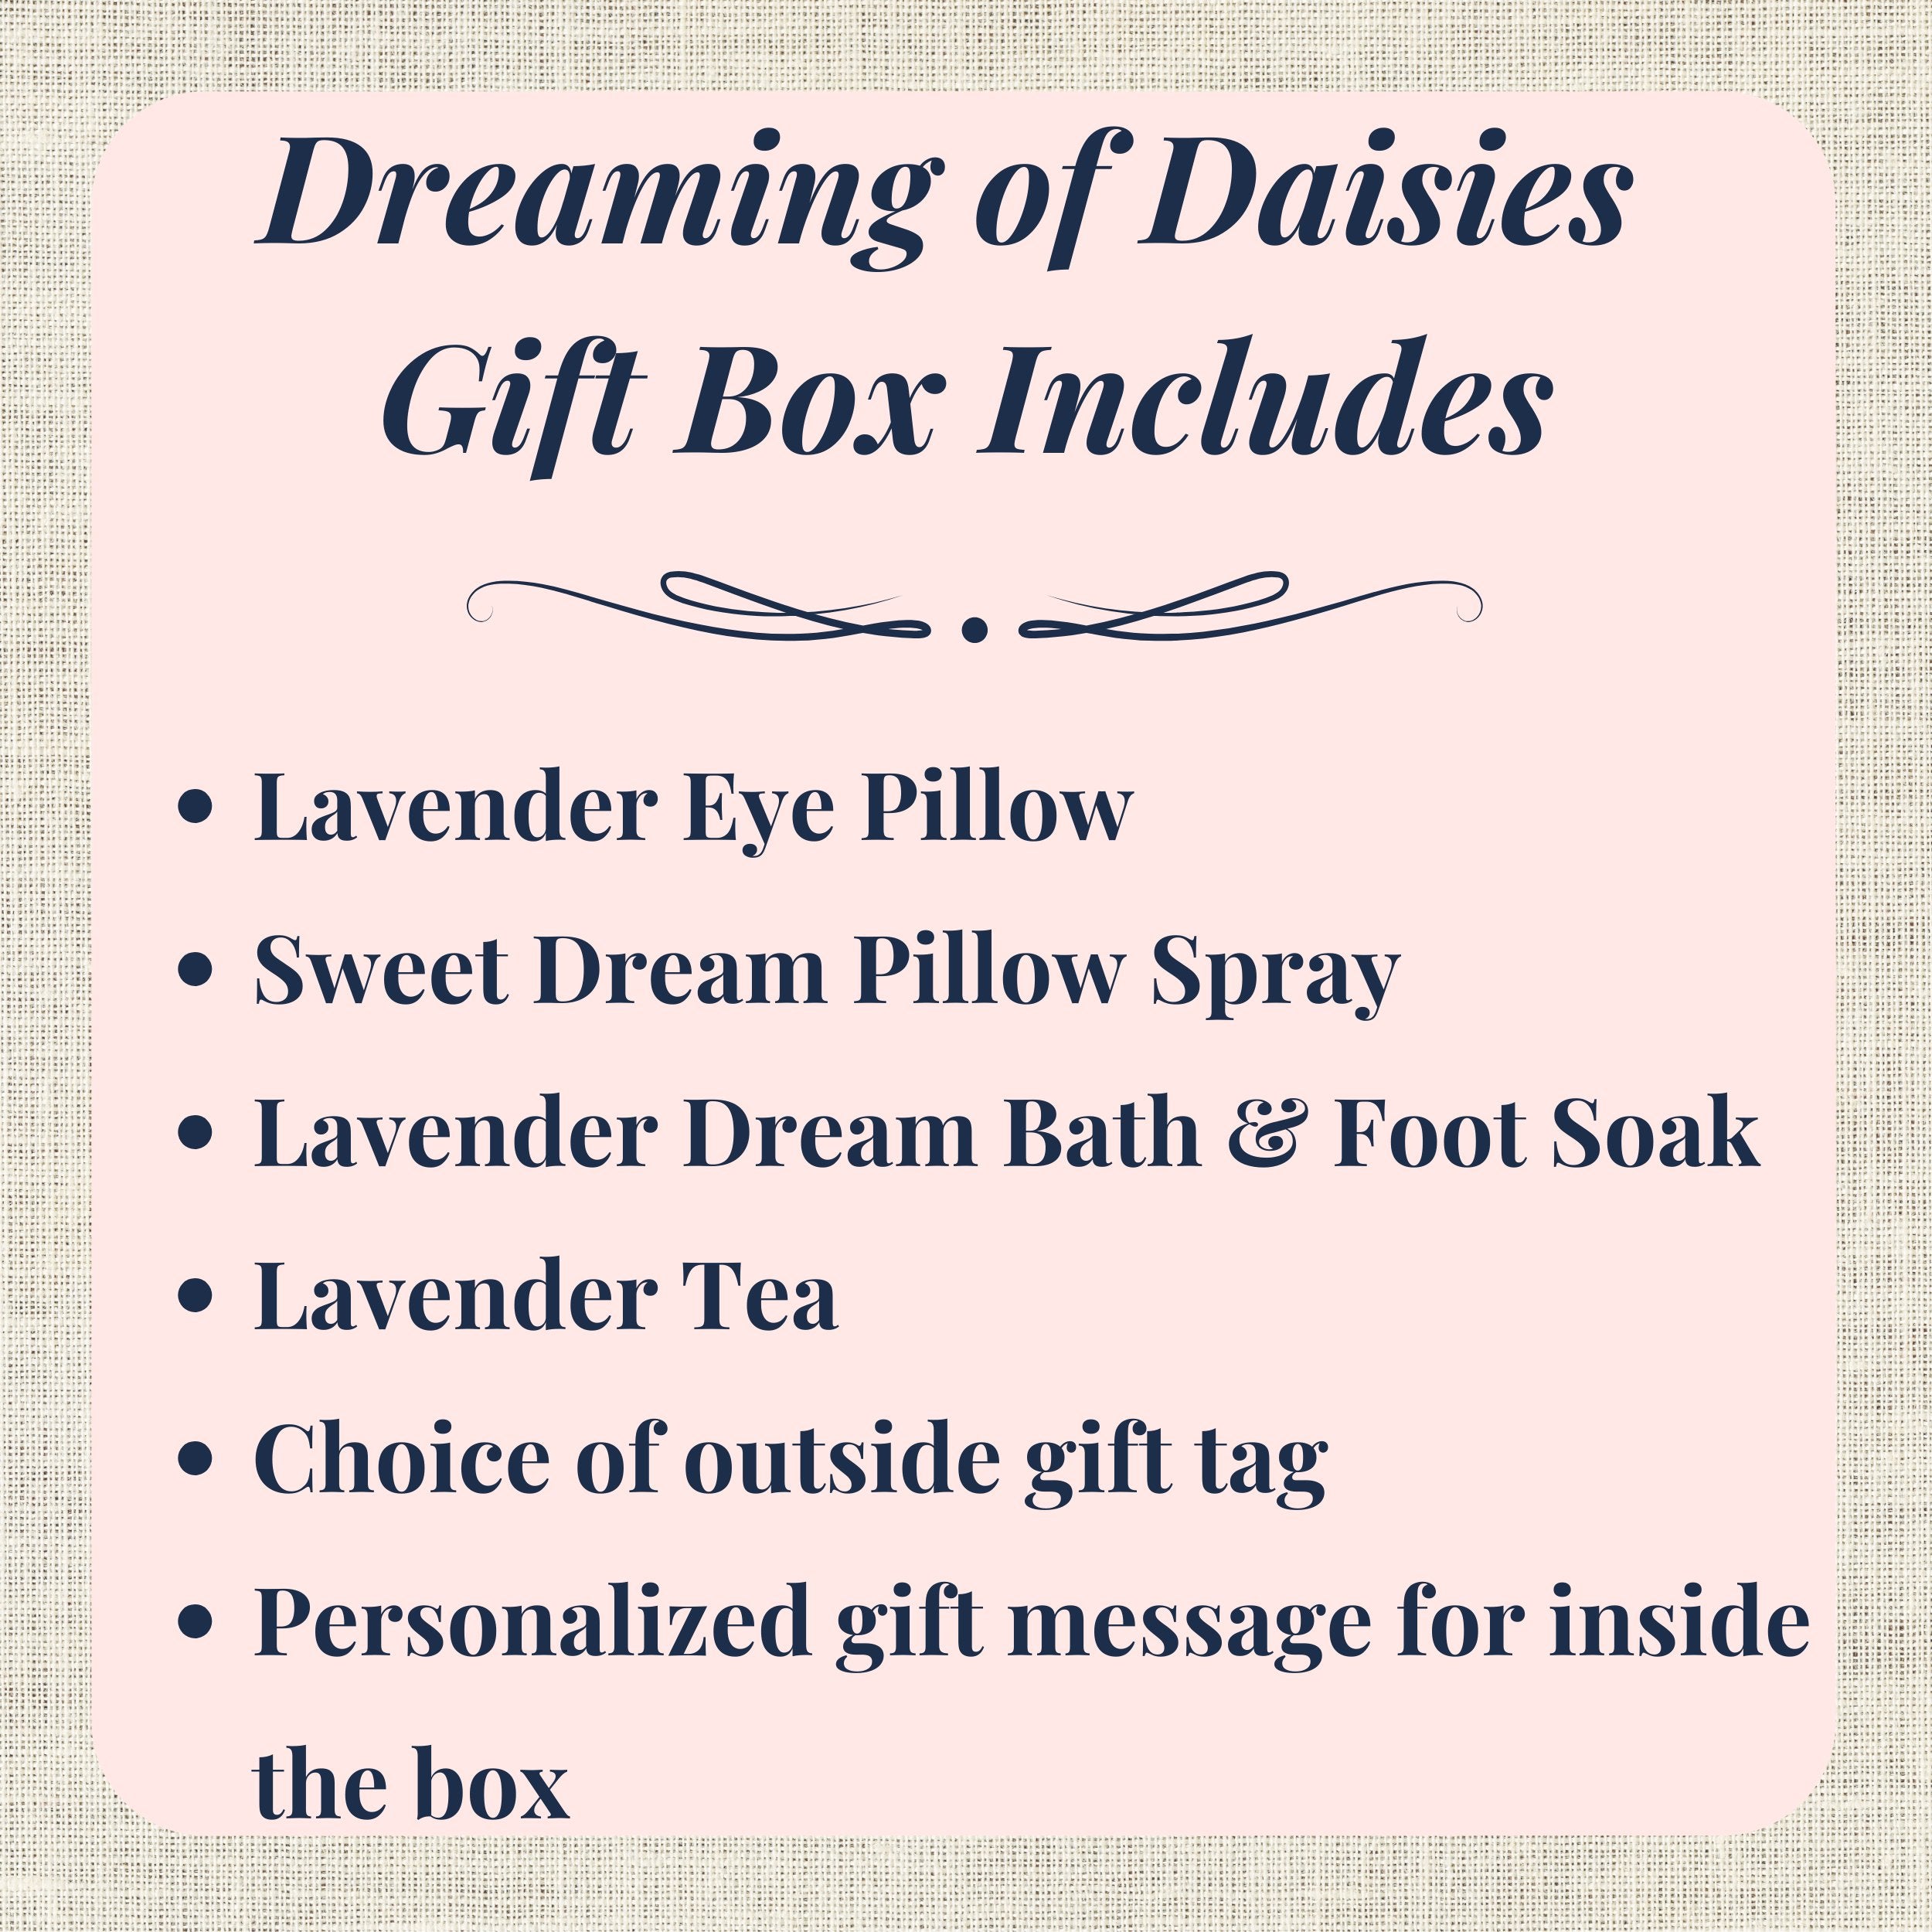 Graphic showing contents of Blue Daisies Gift Box: eye pillow, pillow spray, foot soak, tea, personalized gift message